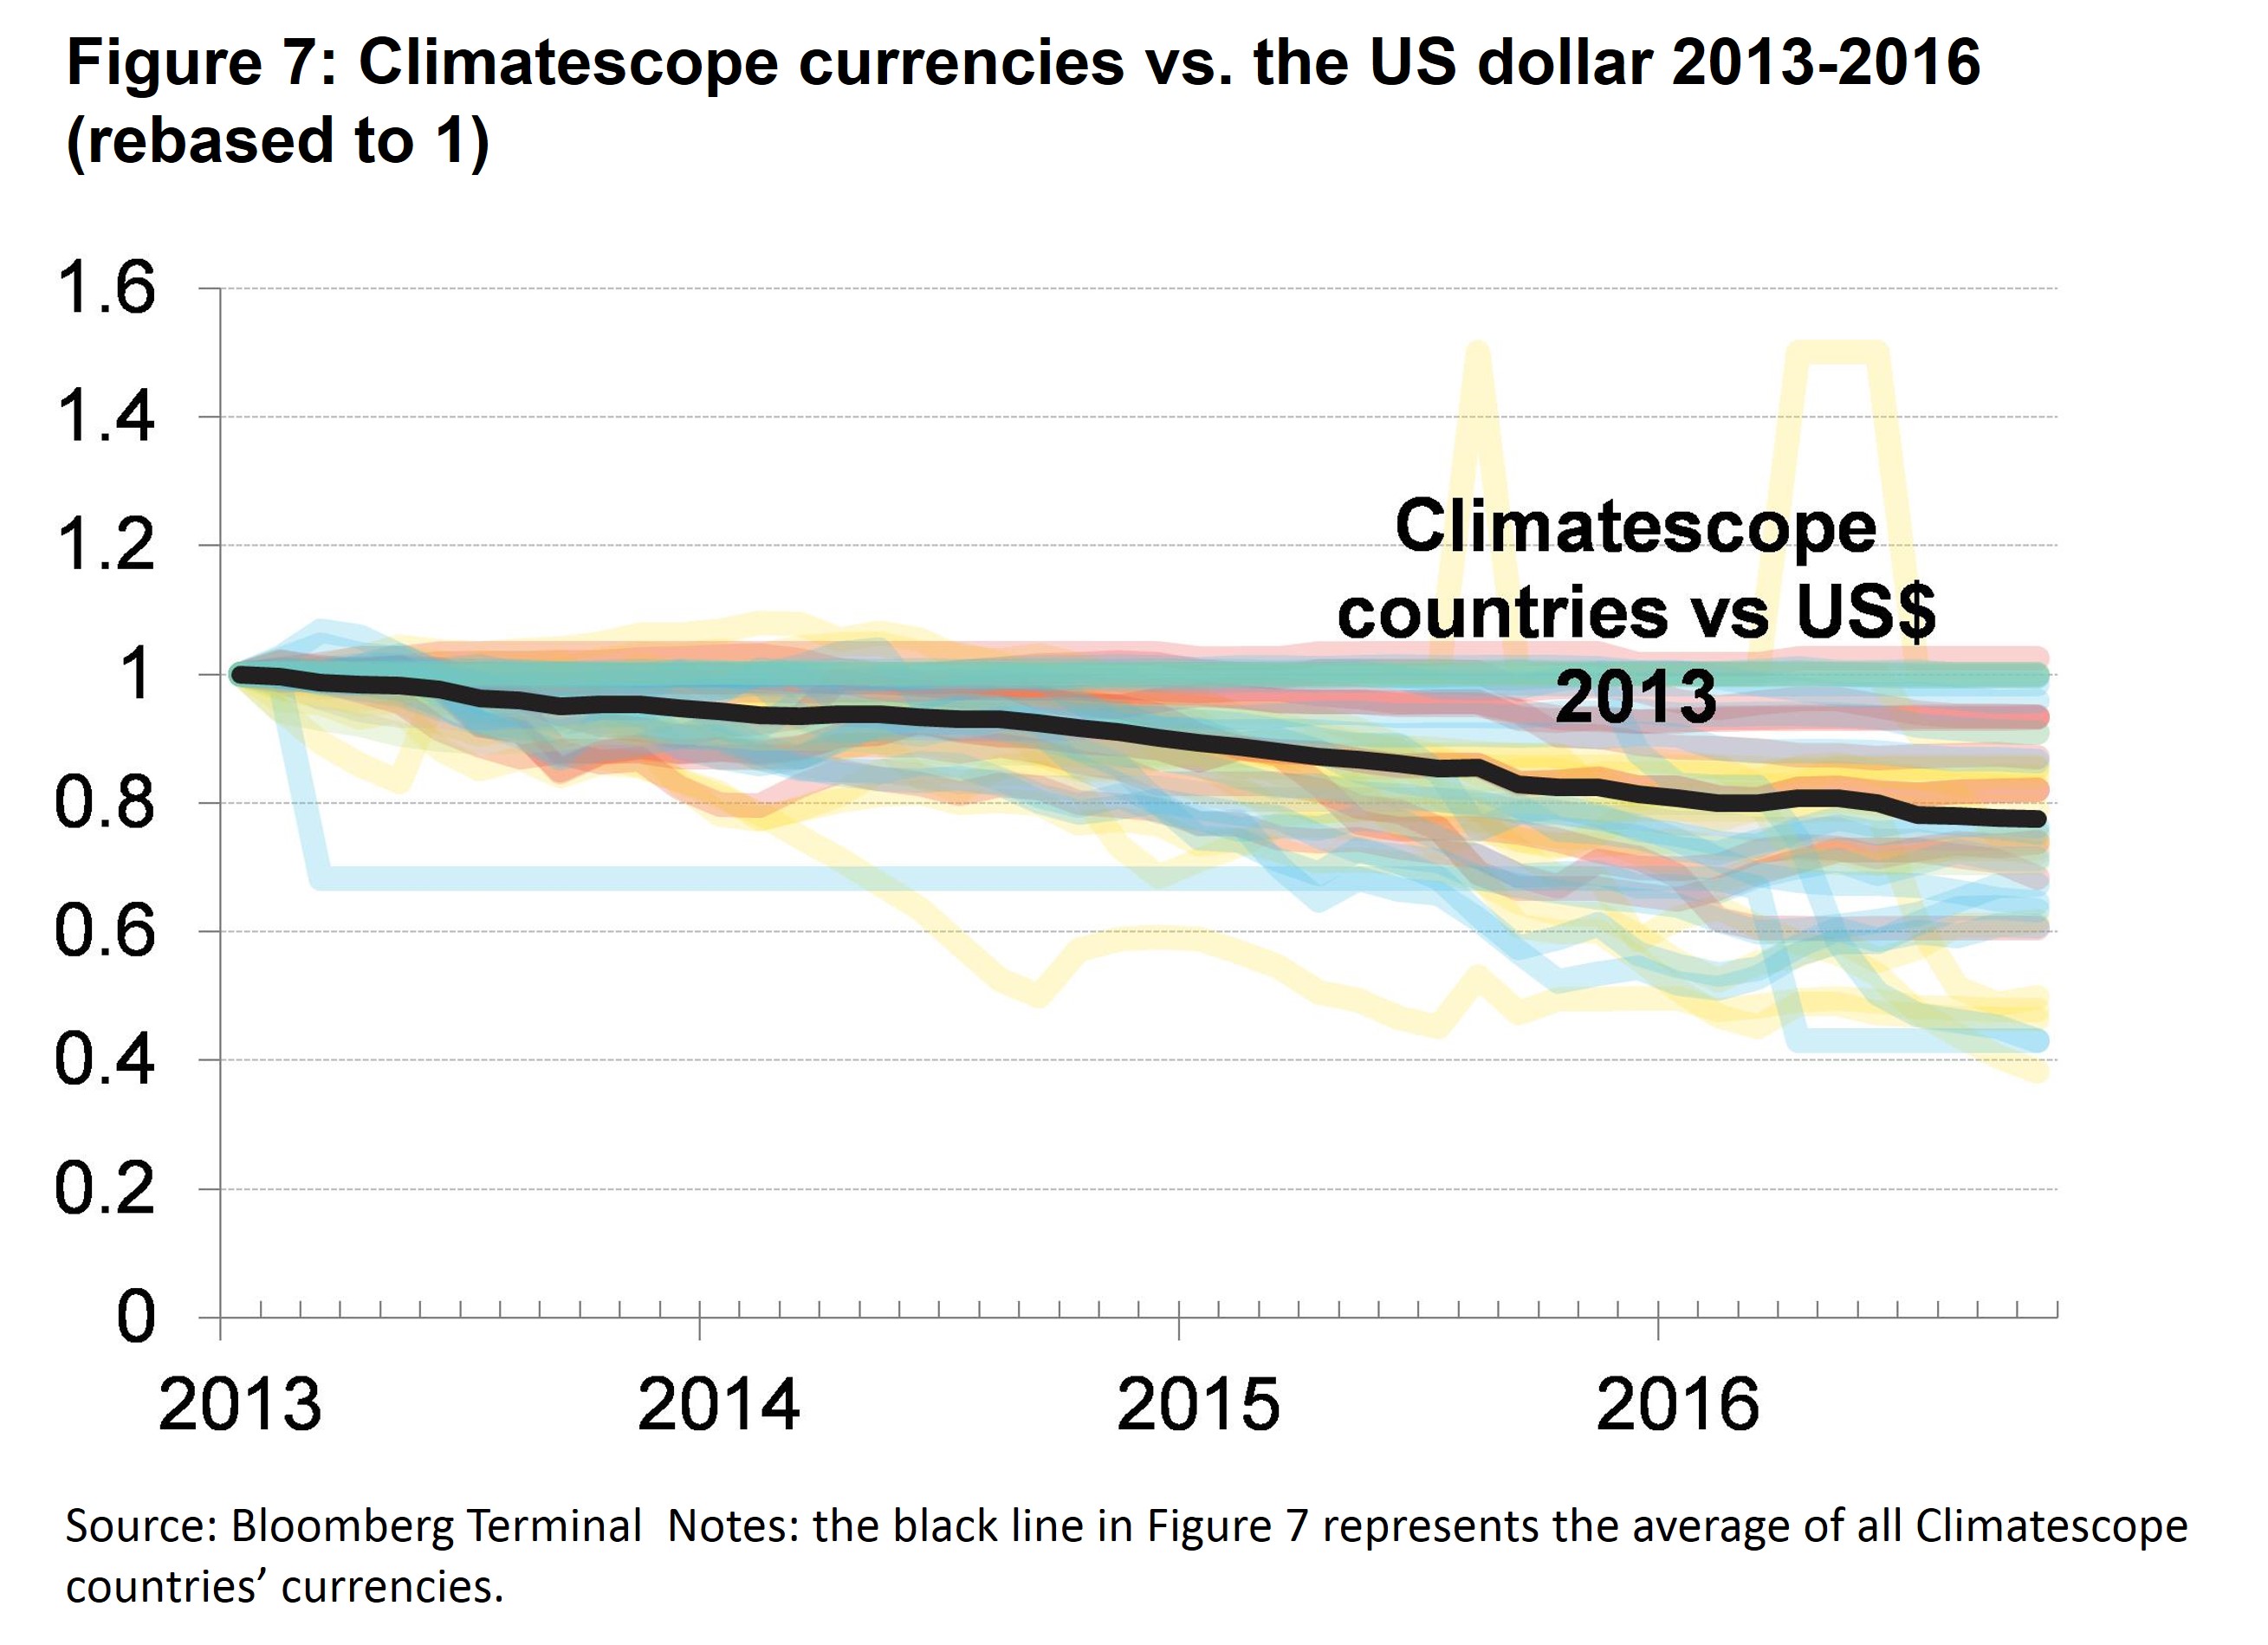 PI Fig 7 - Climatescope currencies vs. the US dollar 2013-2016 (rebased to 1)